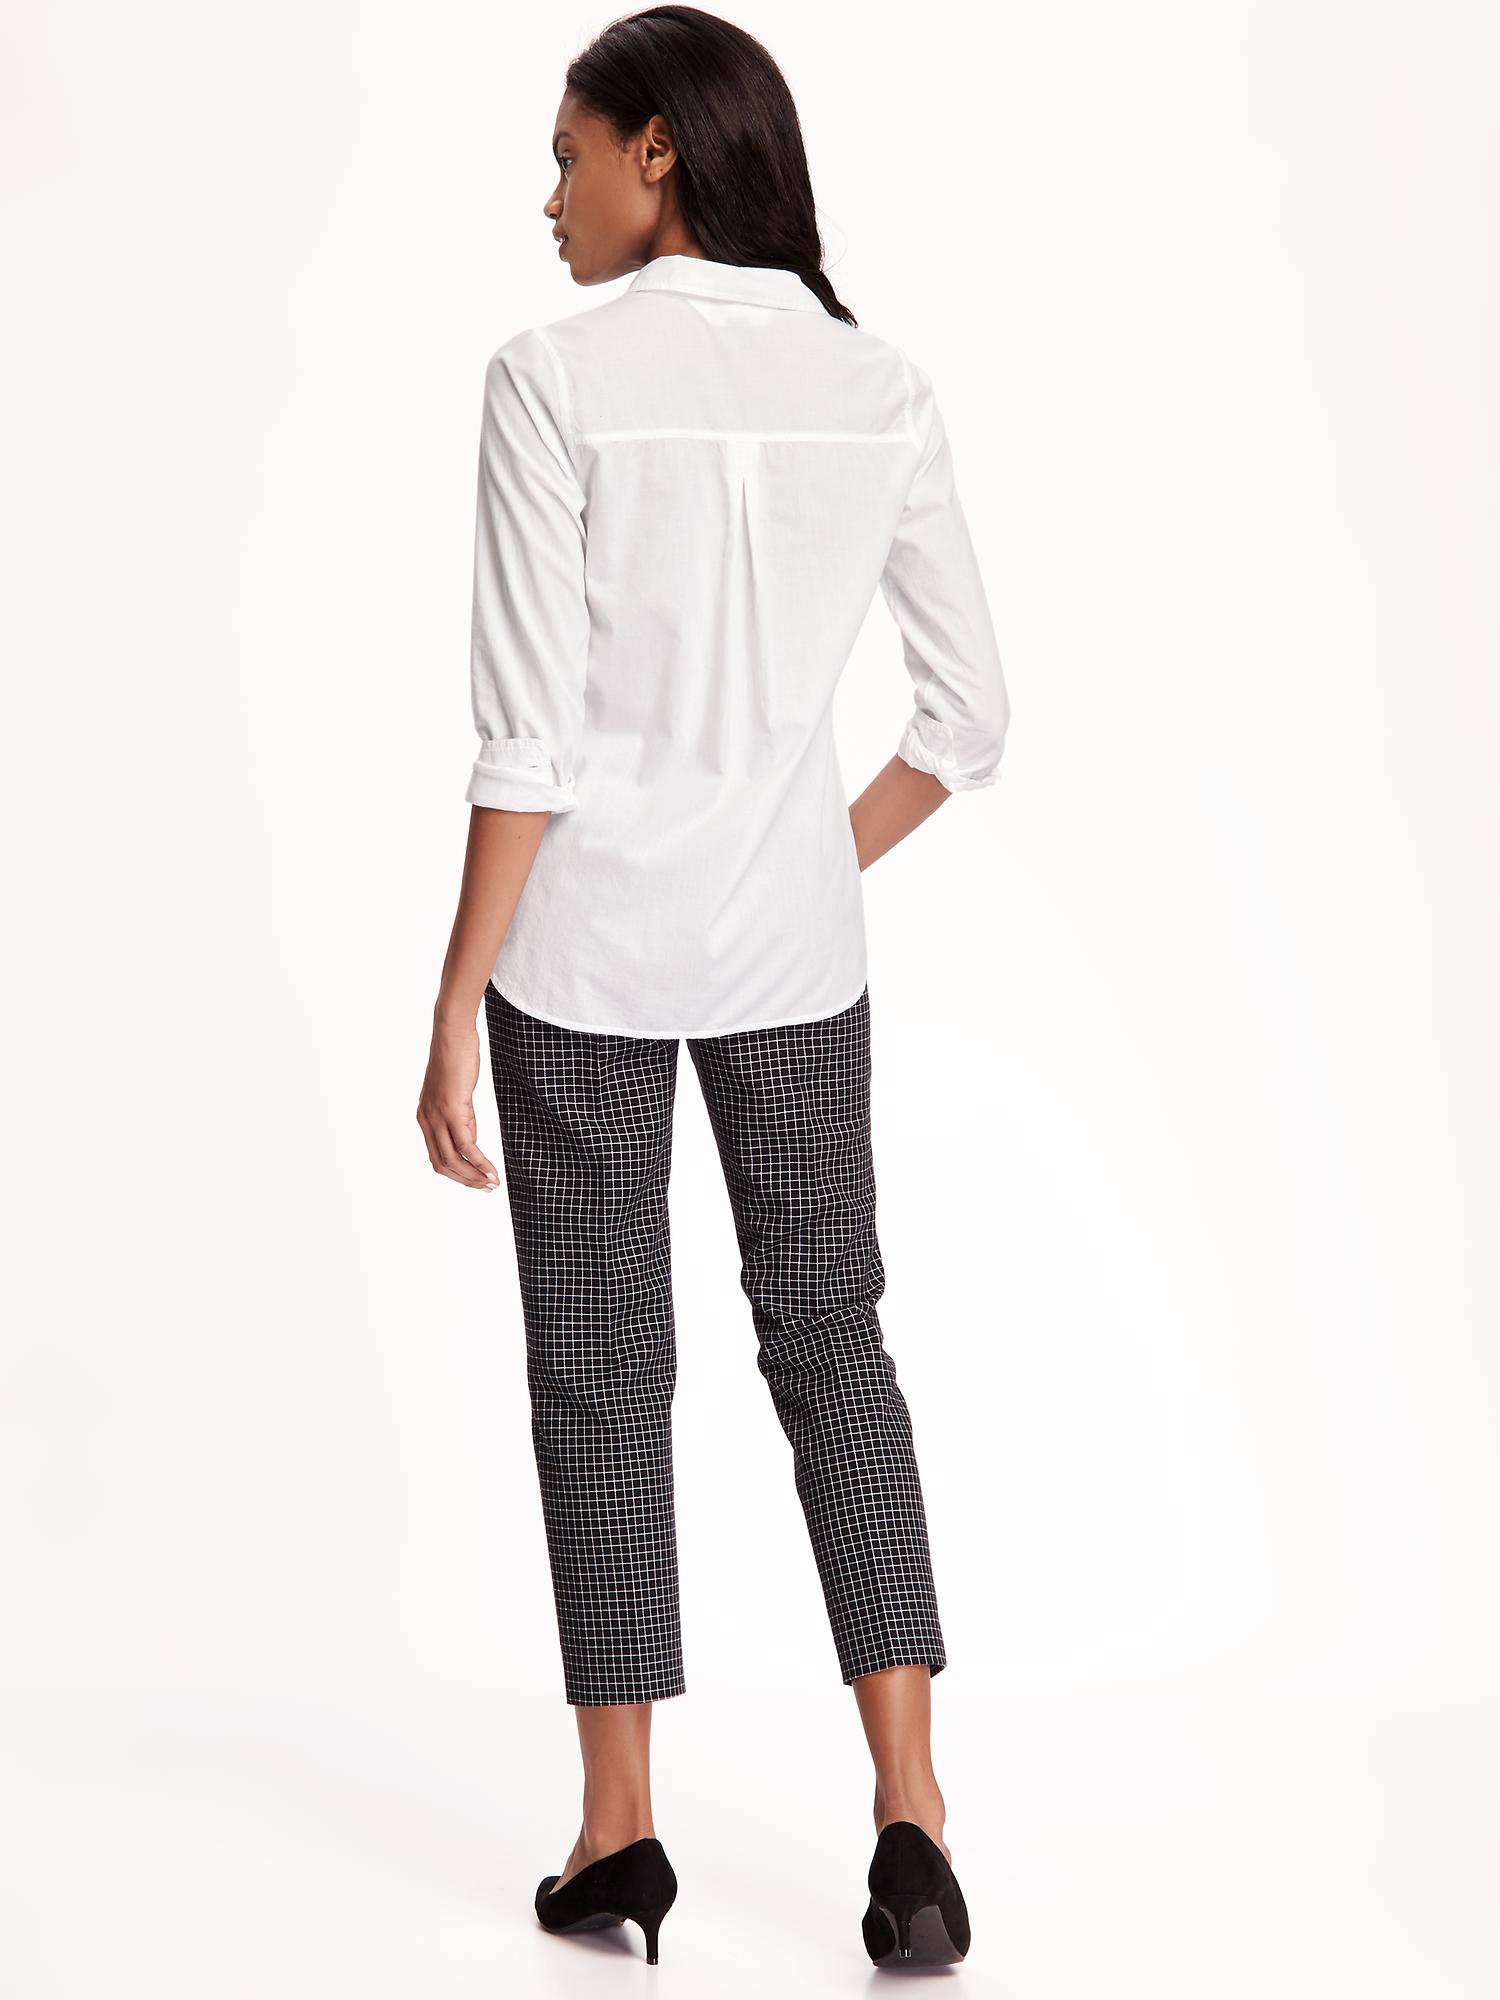 Classic White Shirt for Women | Old Navy